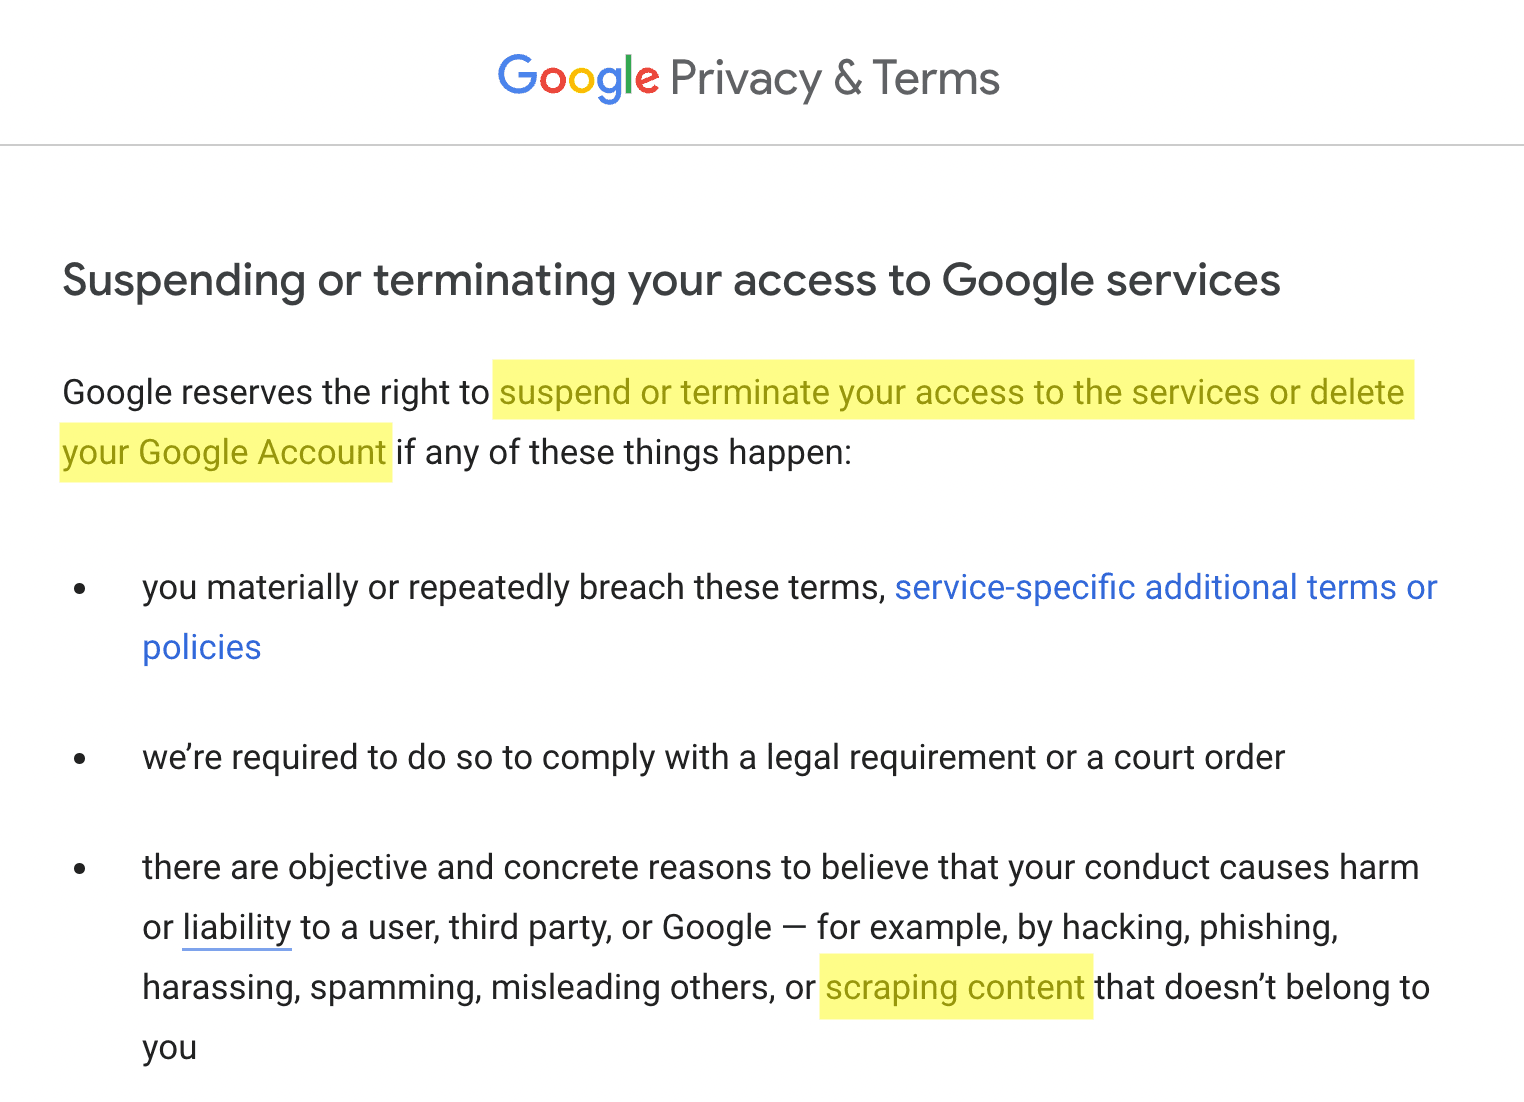 google can terminate your account if you scrape data terms of use - image21.png